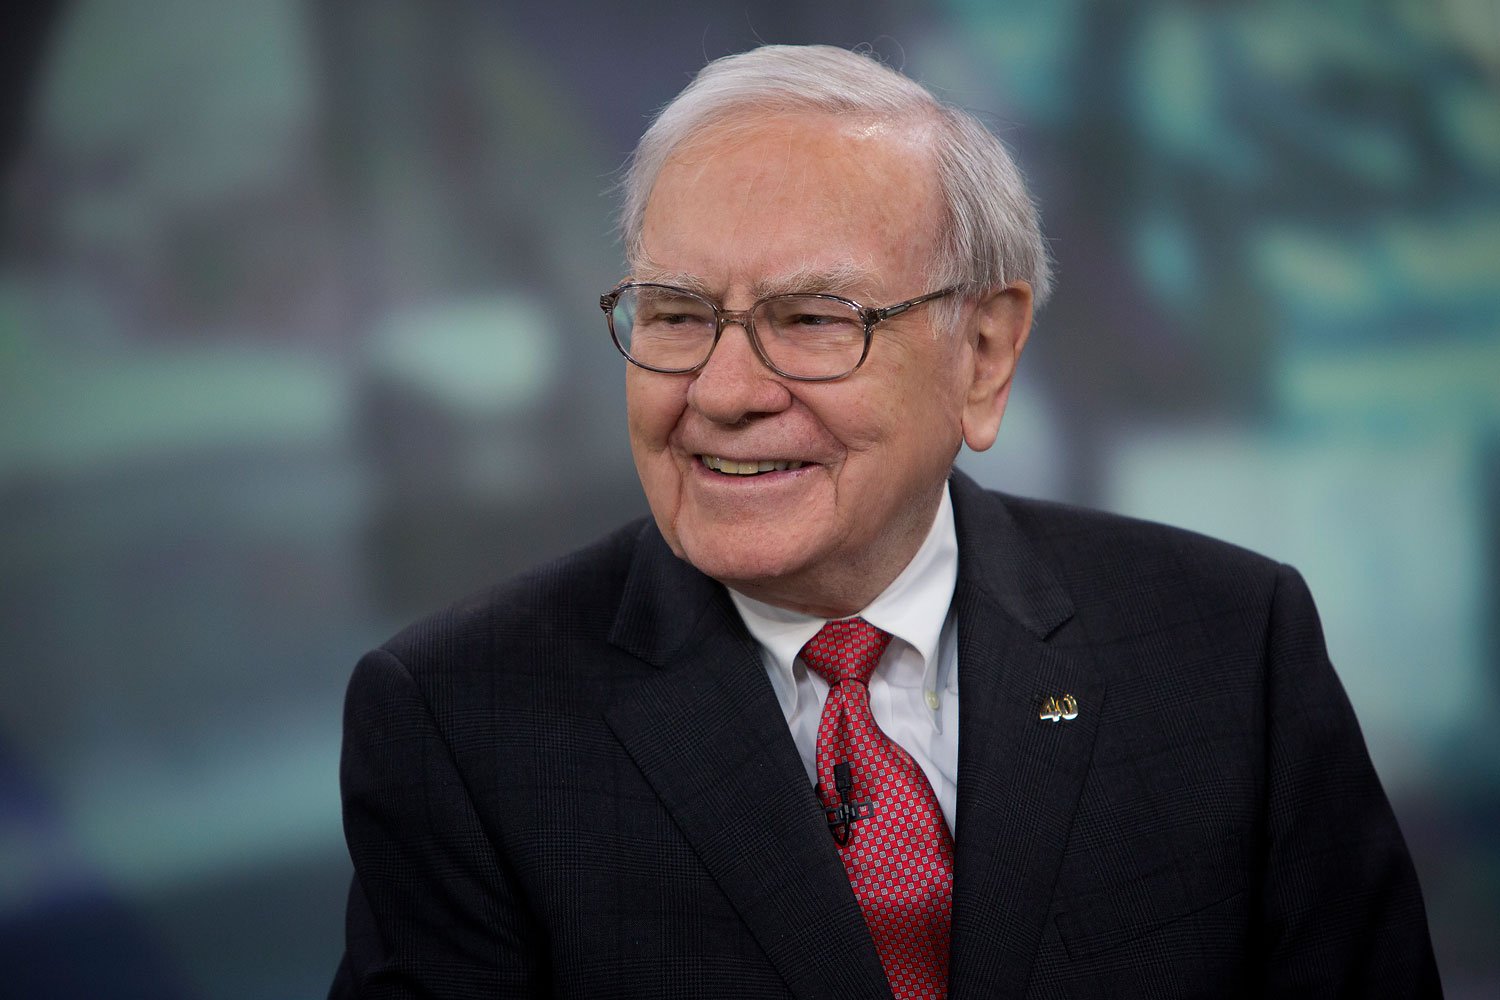 Warren Buffett, chairman and chief executive officer of Berkshire Hathaway Inc., speaks during an interview in New York,  Oct. 22, 2013.  Scott Eells/Bloomberg via Getty Images (Scott Eells&mdash;Bloomberg/Getty Images)